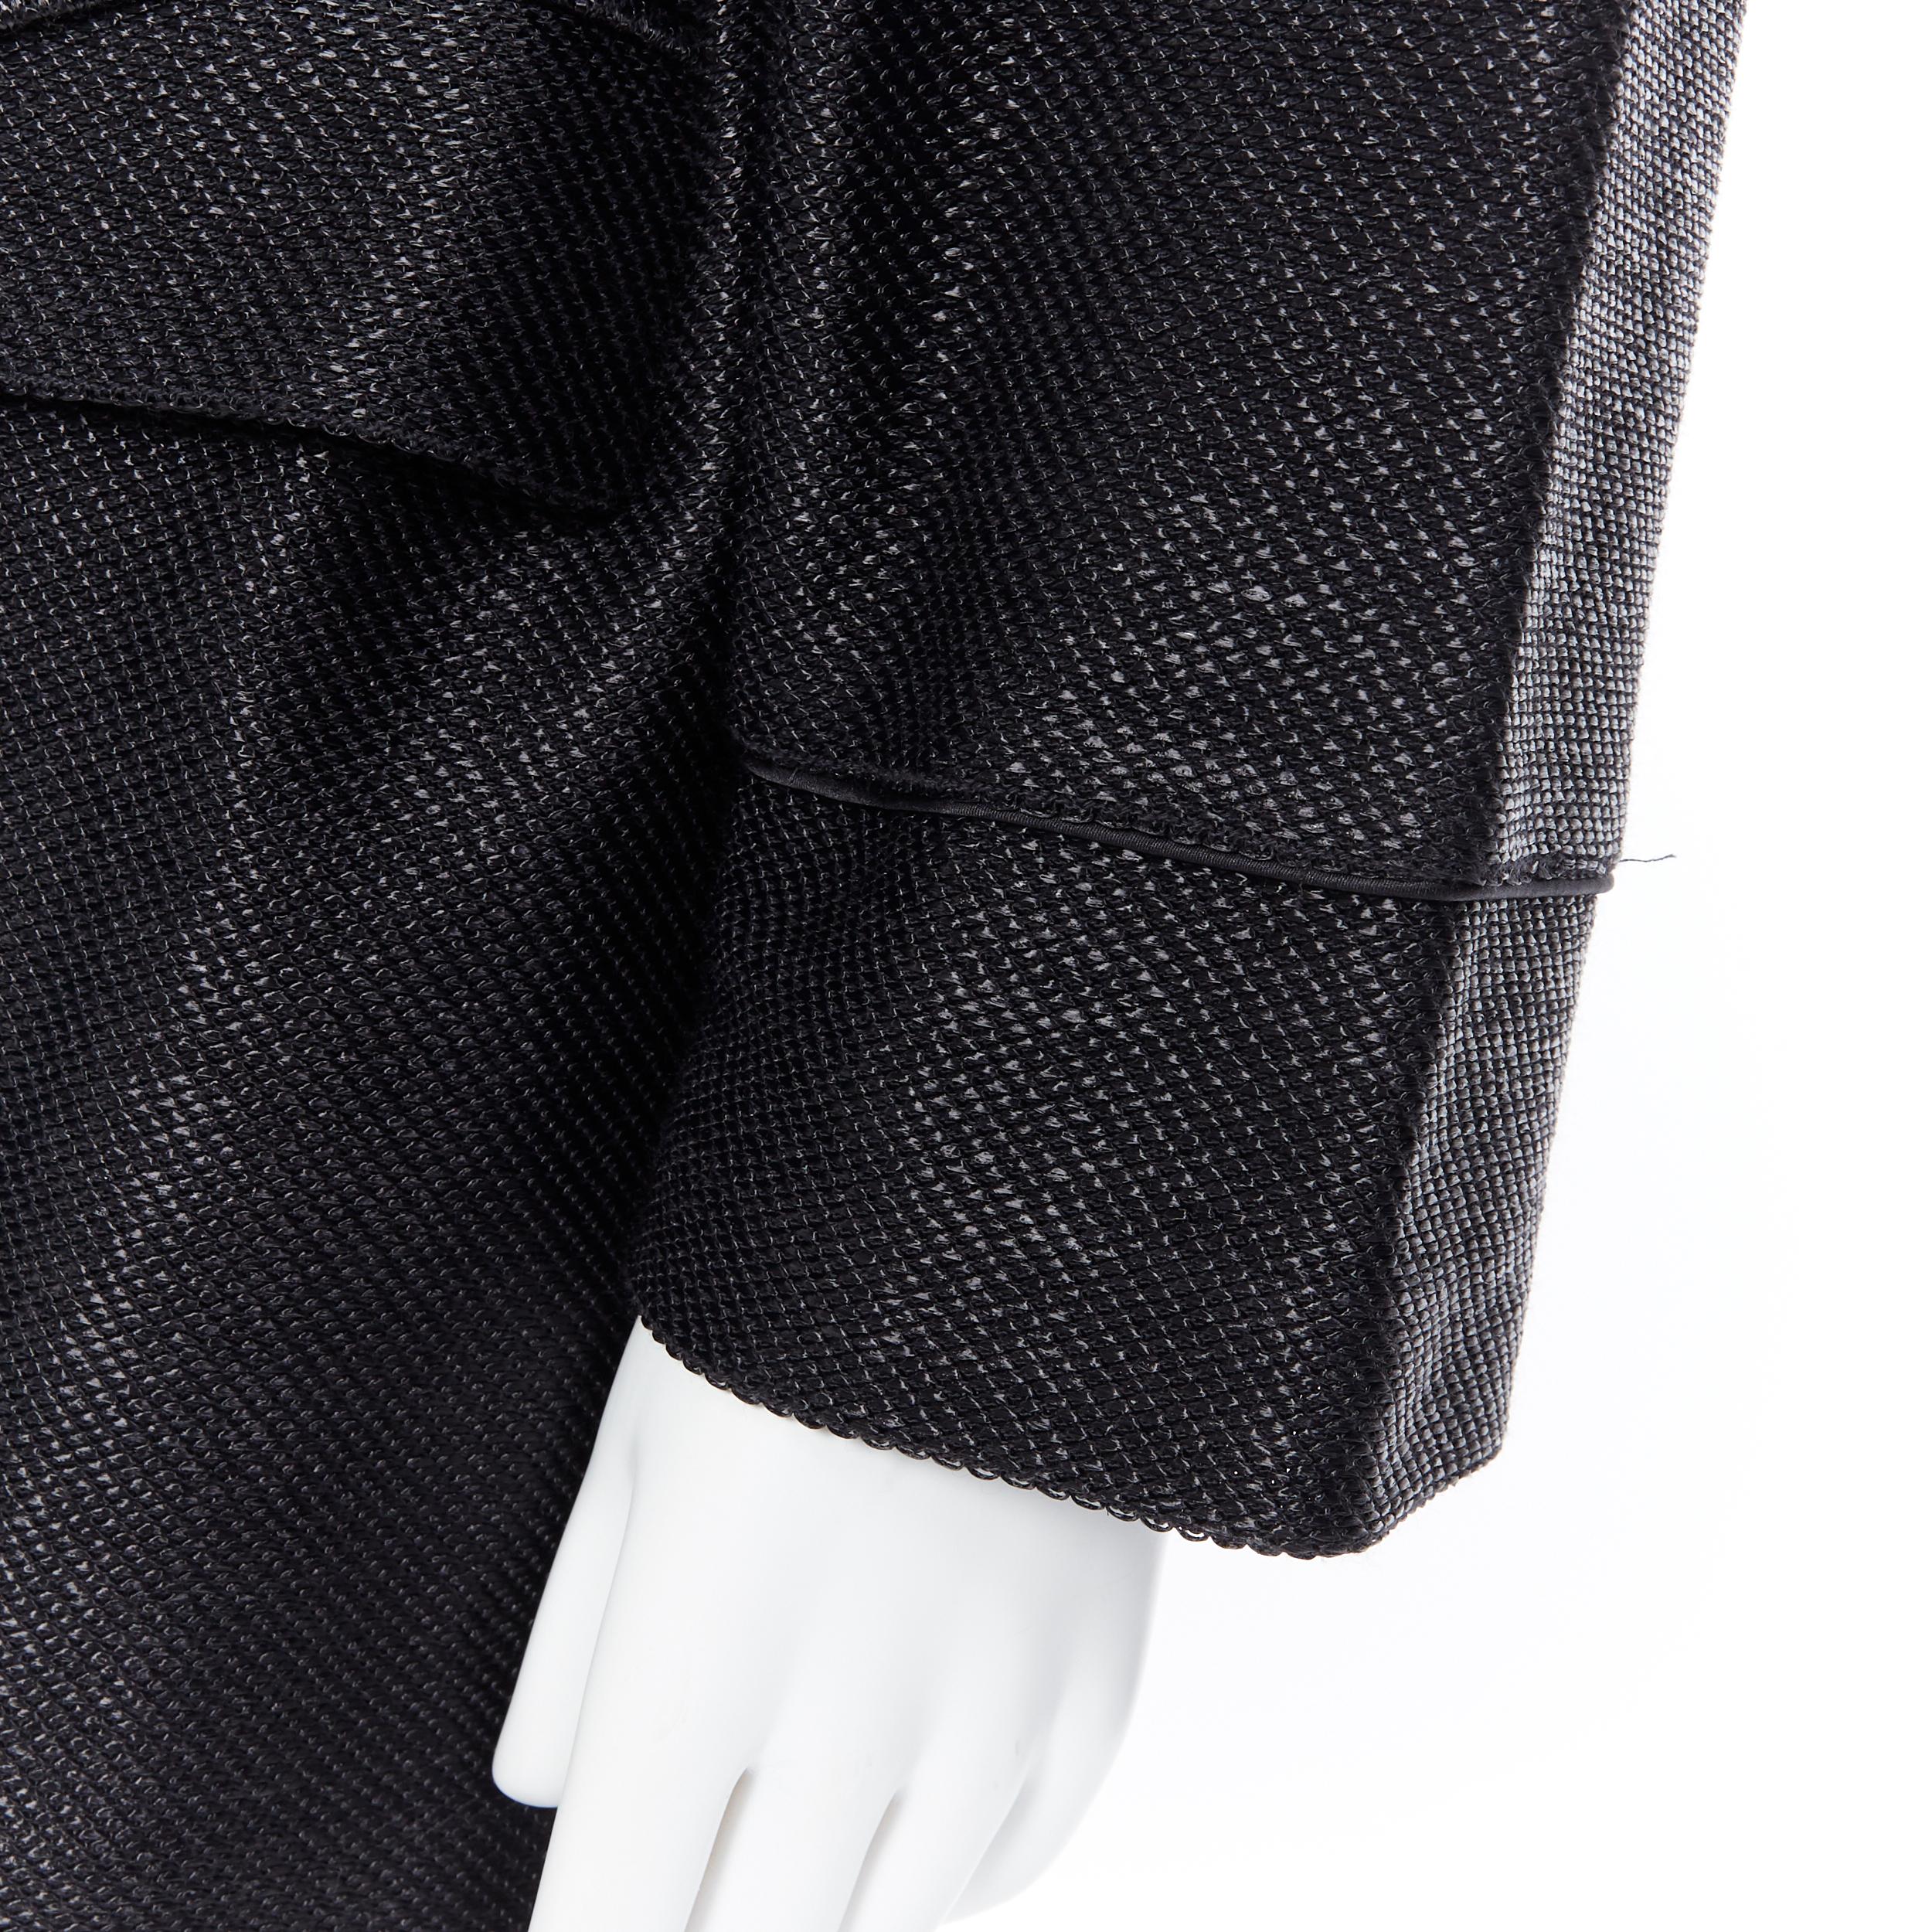 new LA PERLA MENSWEAR Runway black lacquered raffia weave belted robe coat L rare
Brand: La Perla 
Collection: Spring Summer 2015
Model Name / Style: Belted robe
Material: Viscose, cotton
Color: Black
Pattern: Solid
Extra Detail: Can be worn indoors